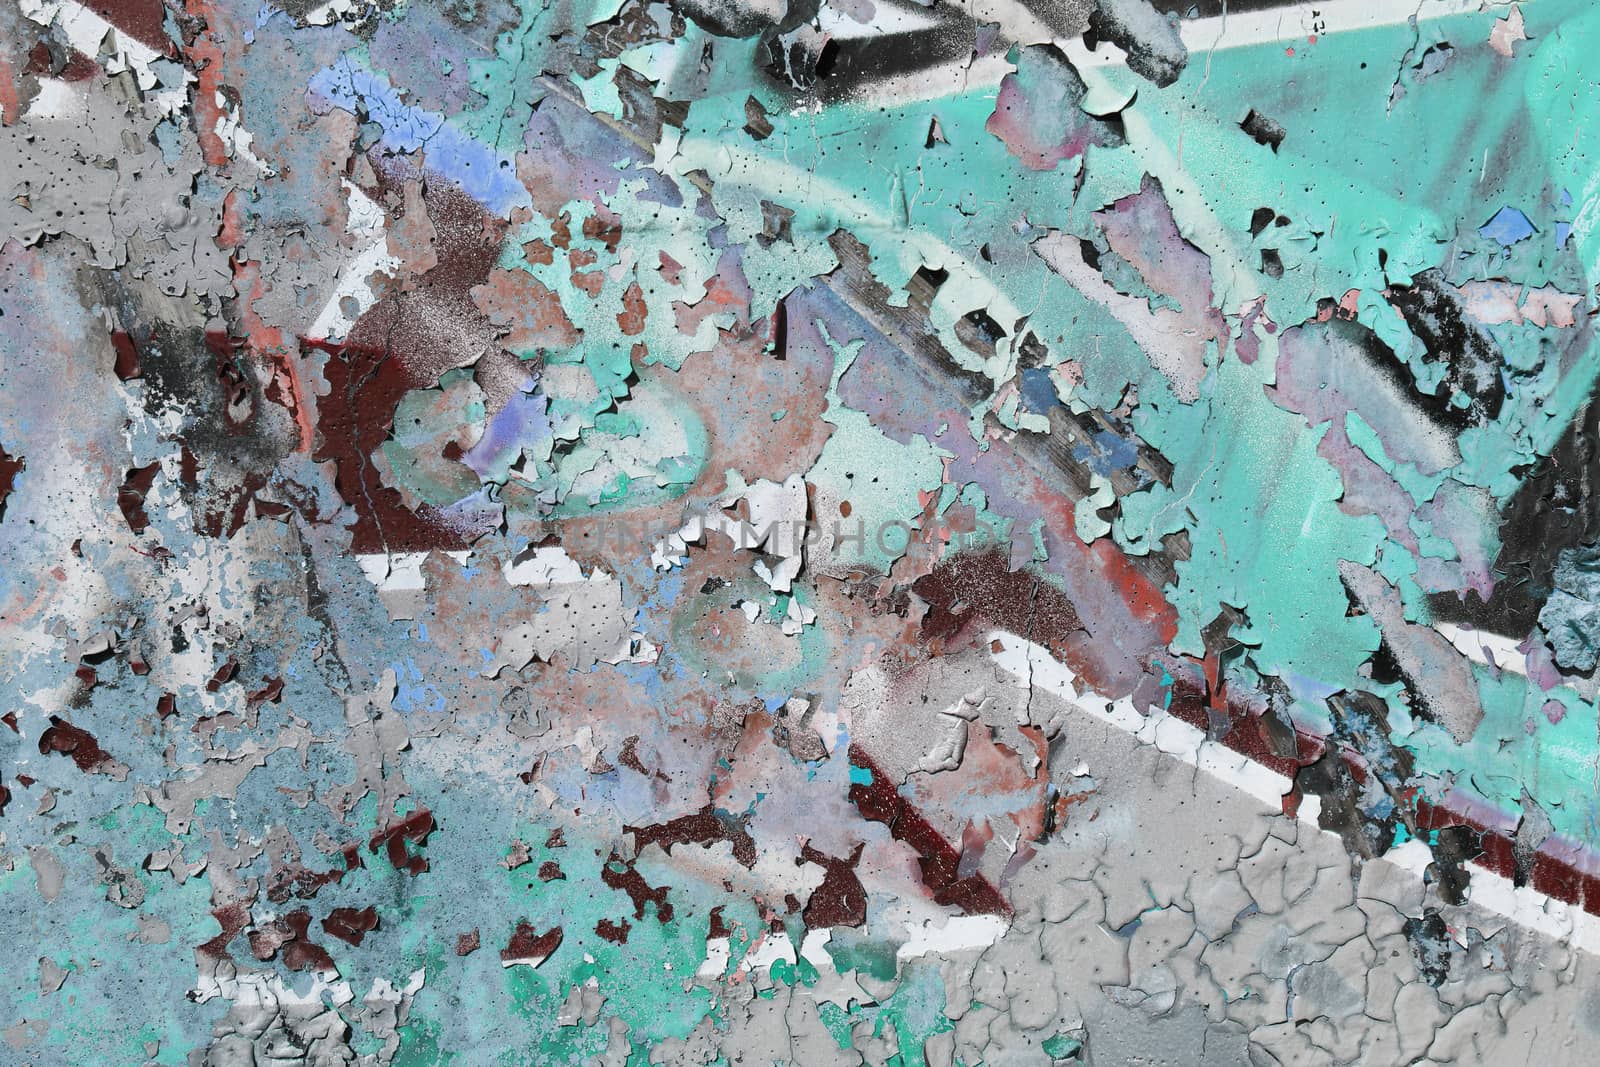 Old Weathered Graffiti Wall. Colorful Concrete Wall Fragment. Grunge Turquoise.